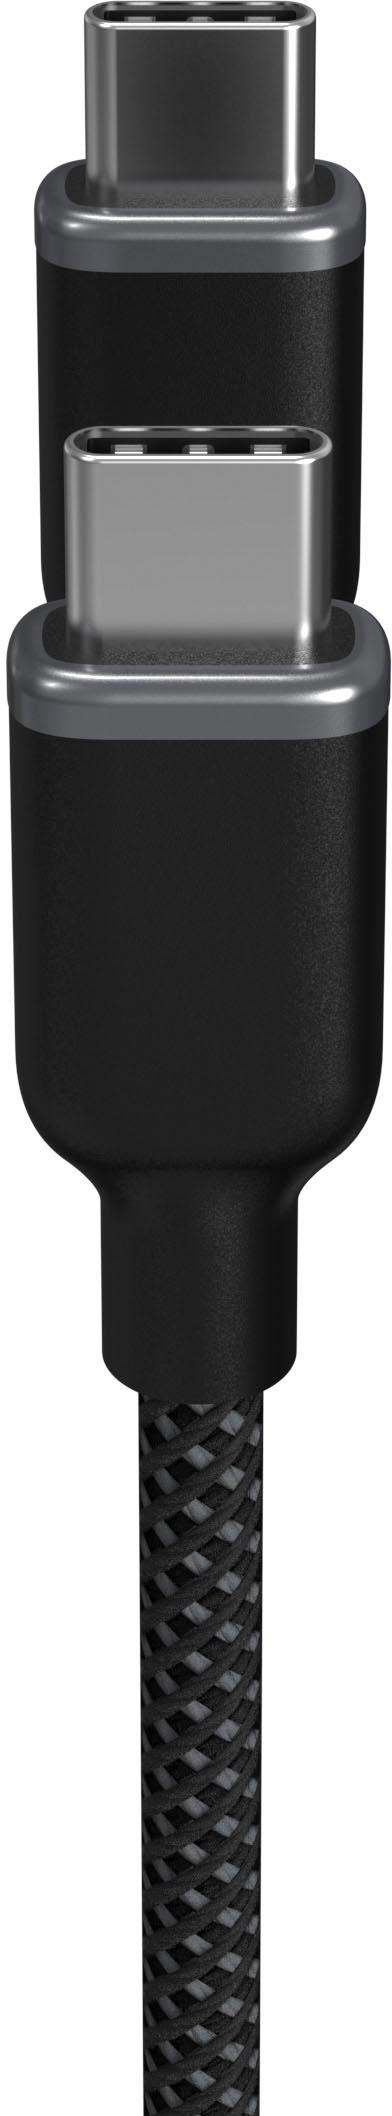 mophie Charge Stream USB-C to USB-C 3m/10ft Cable - 60W Power Delivery,  Enduraflex Silicone, Ultra-Durable Braided Design for Everyday Use